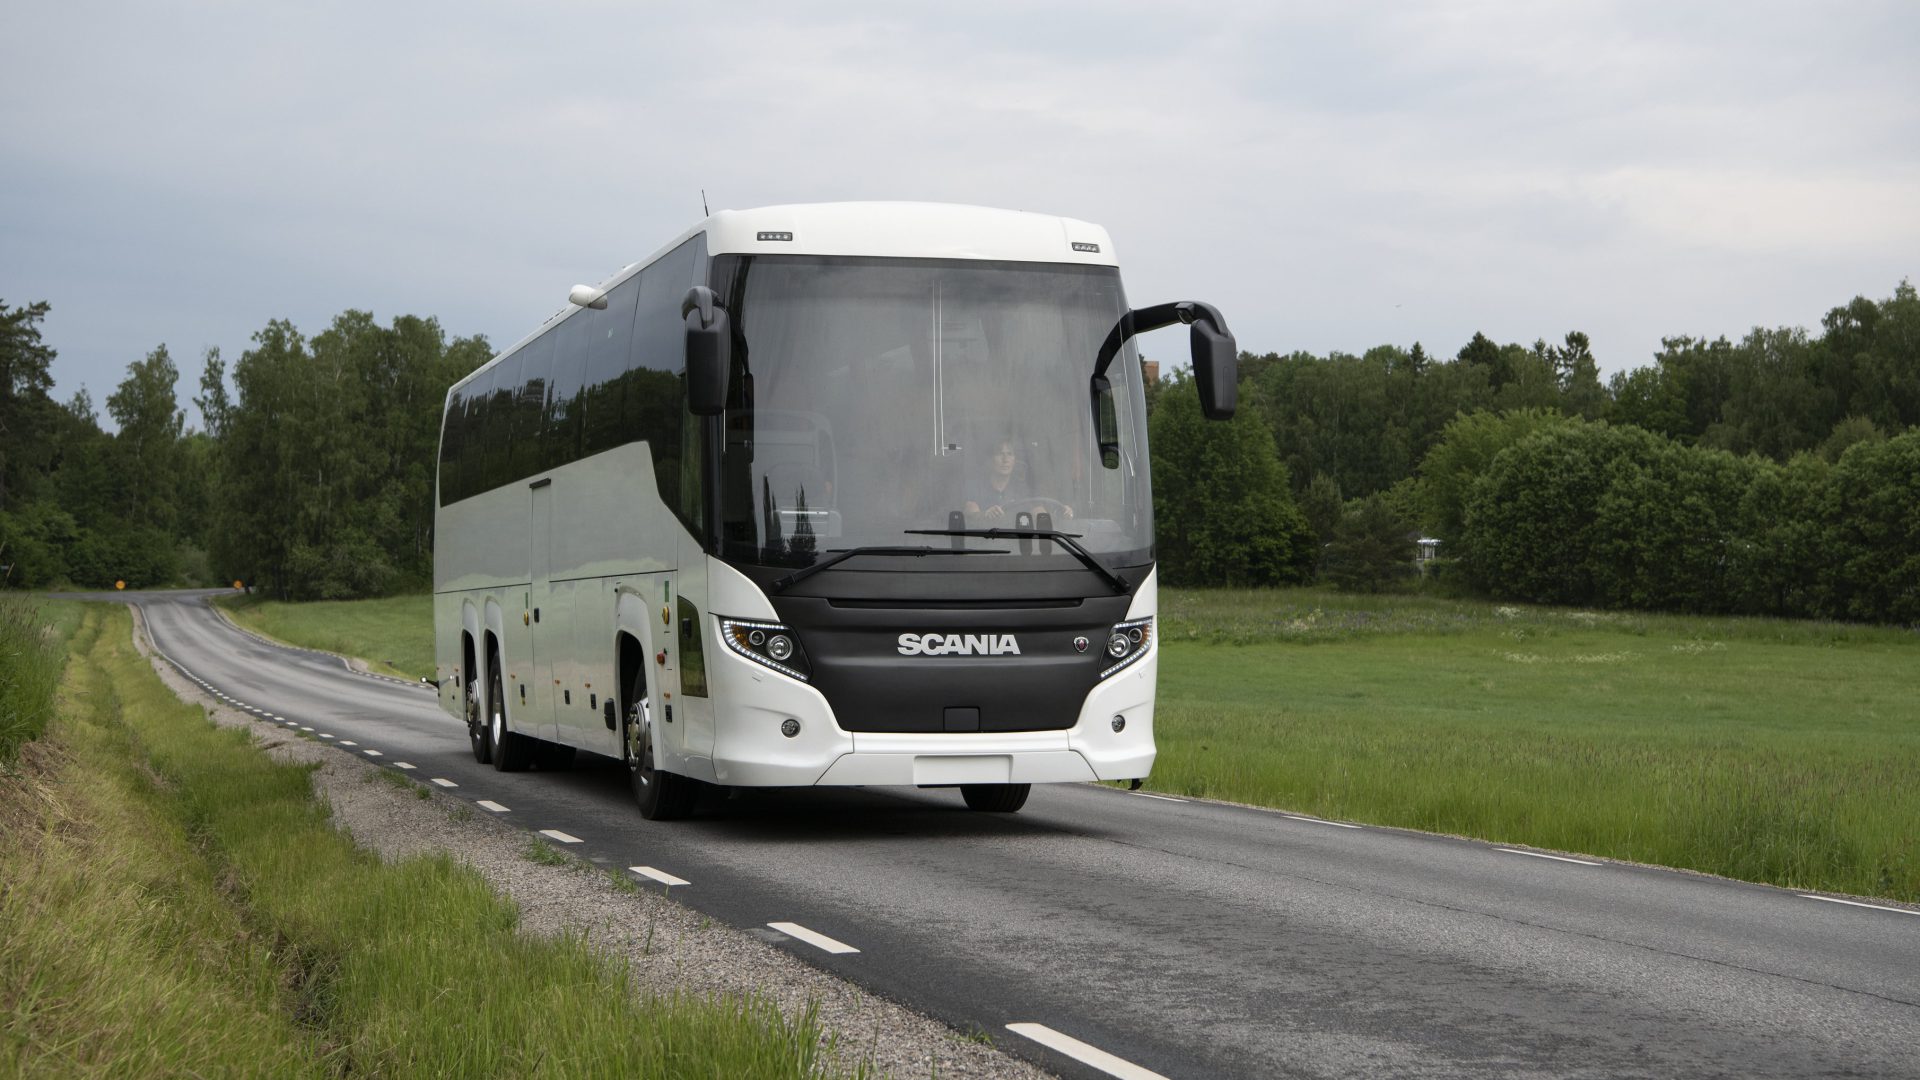 Scania Touring HD 3-axle with steered tag axle.